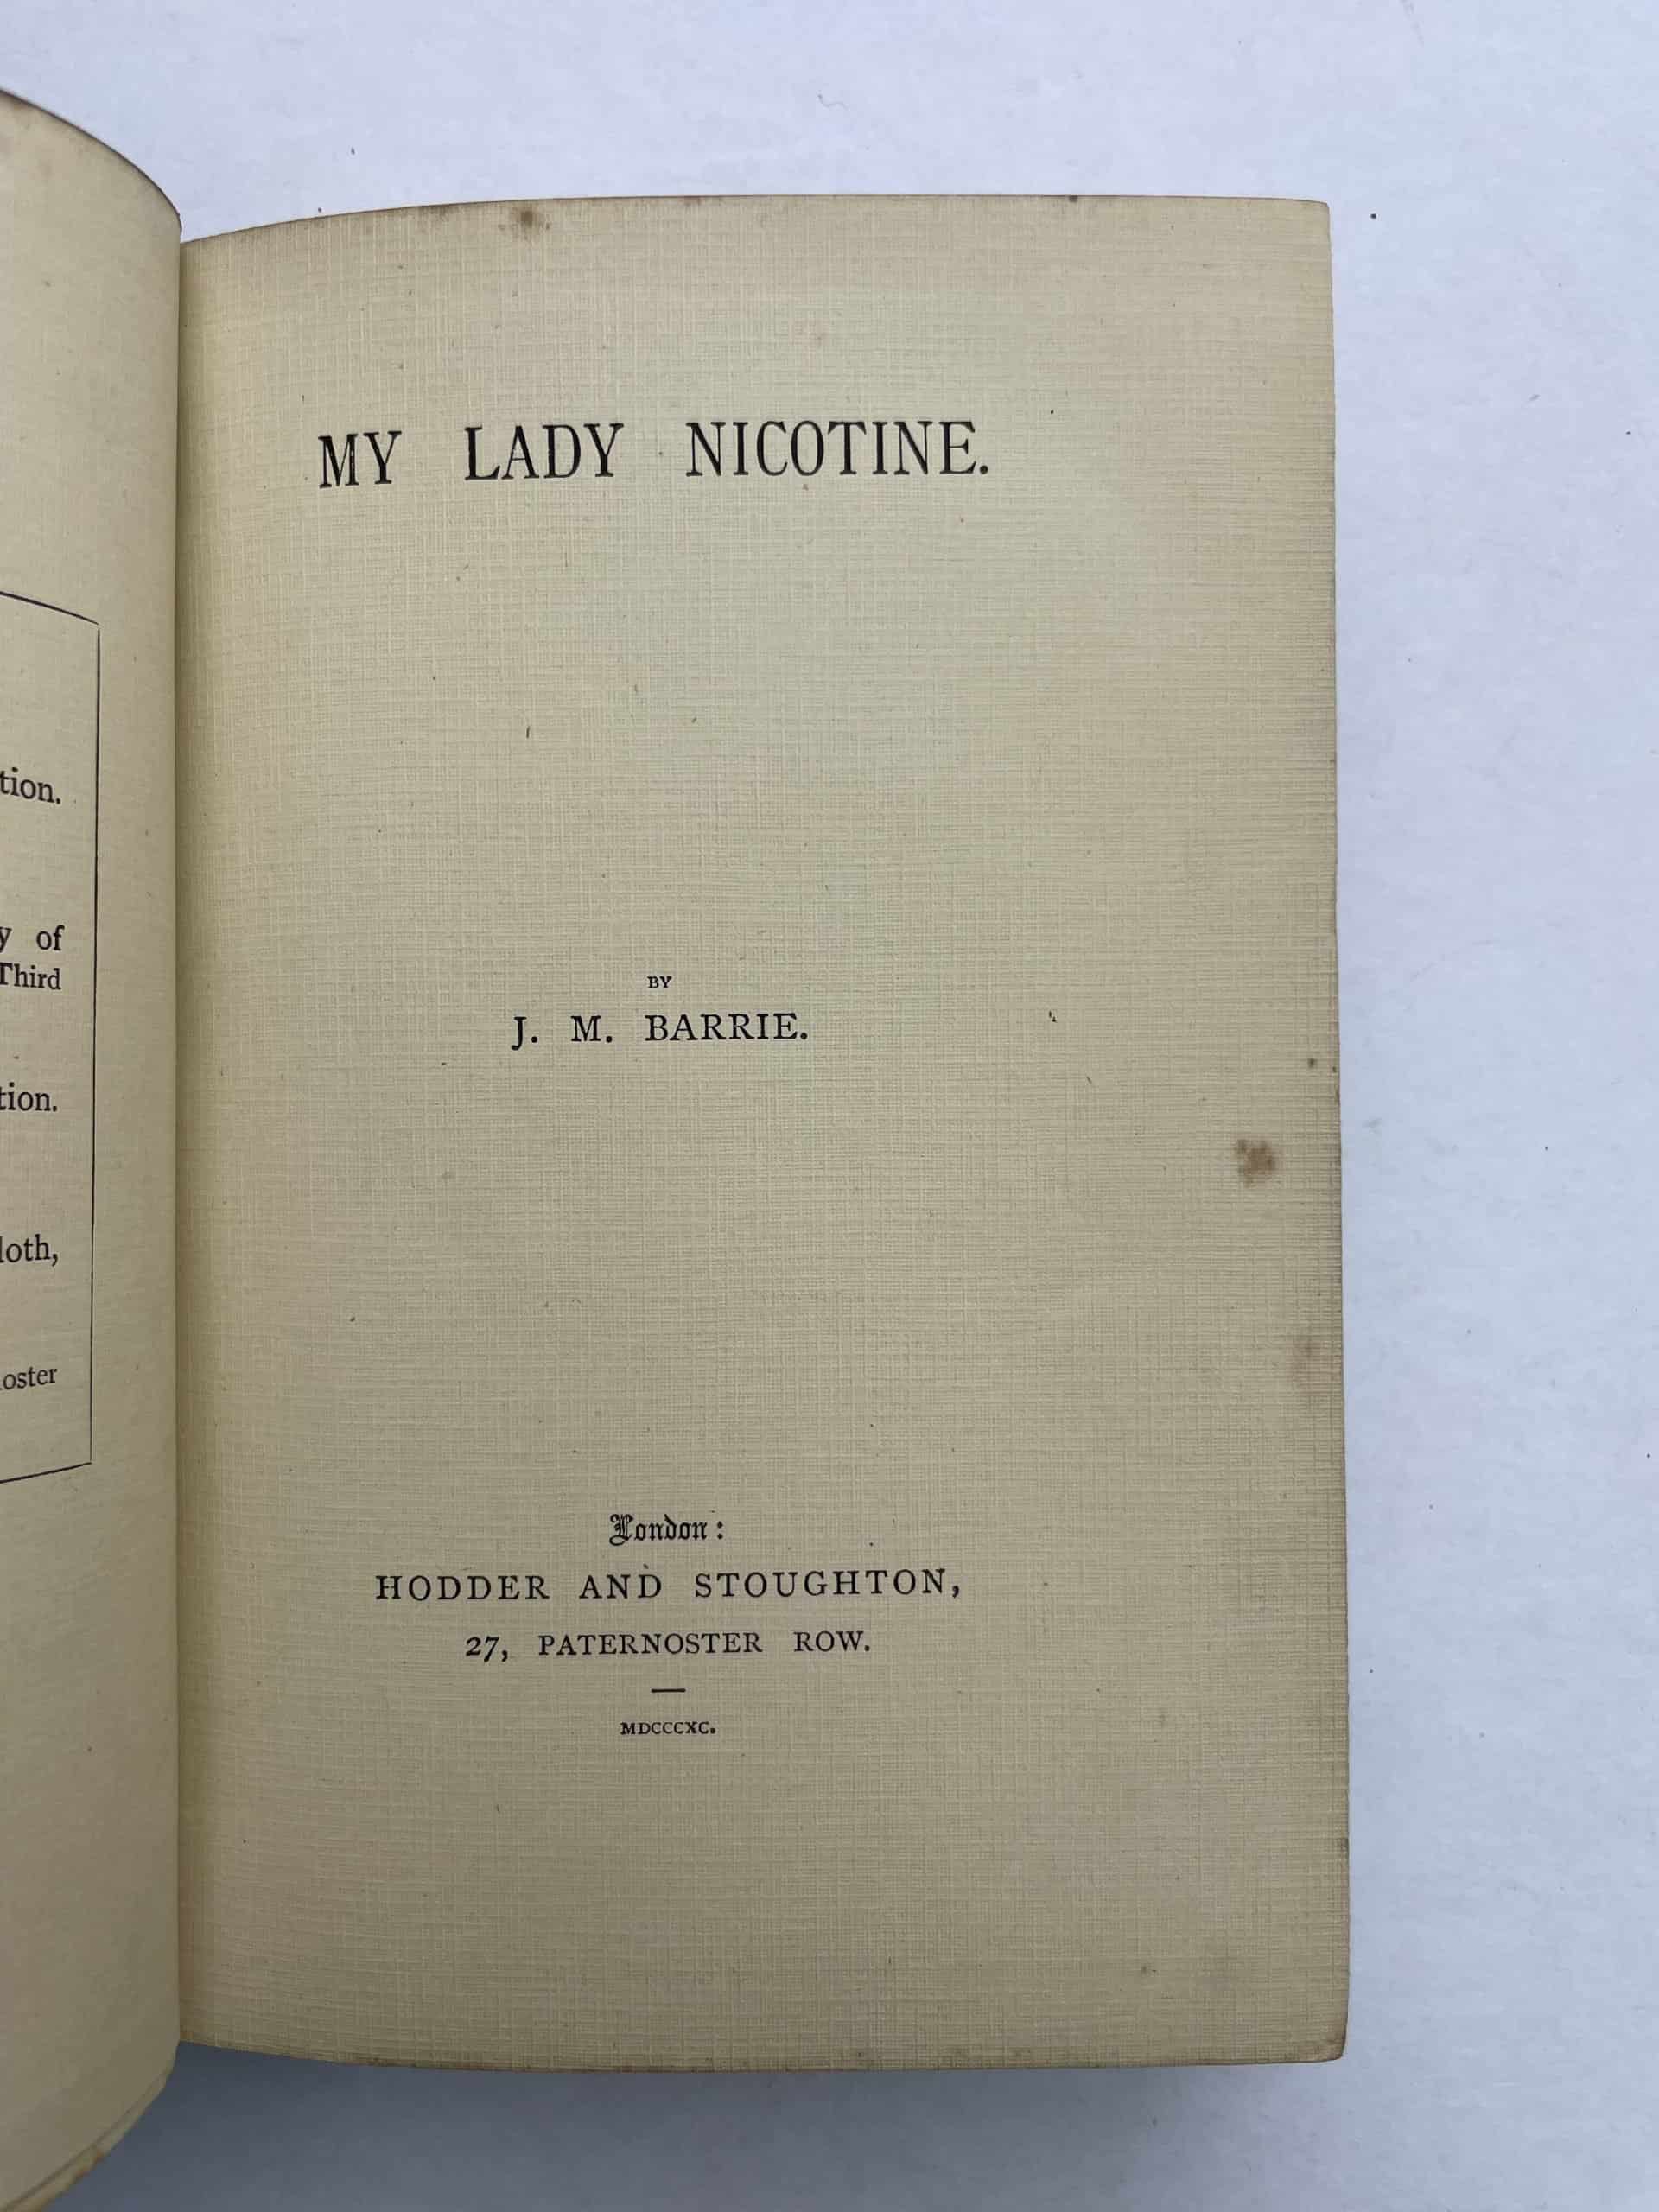 jm barrie my lady nicotine firsted2